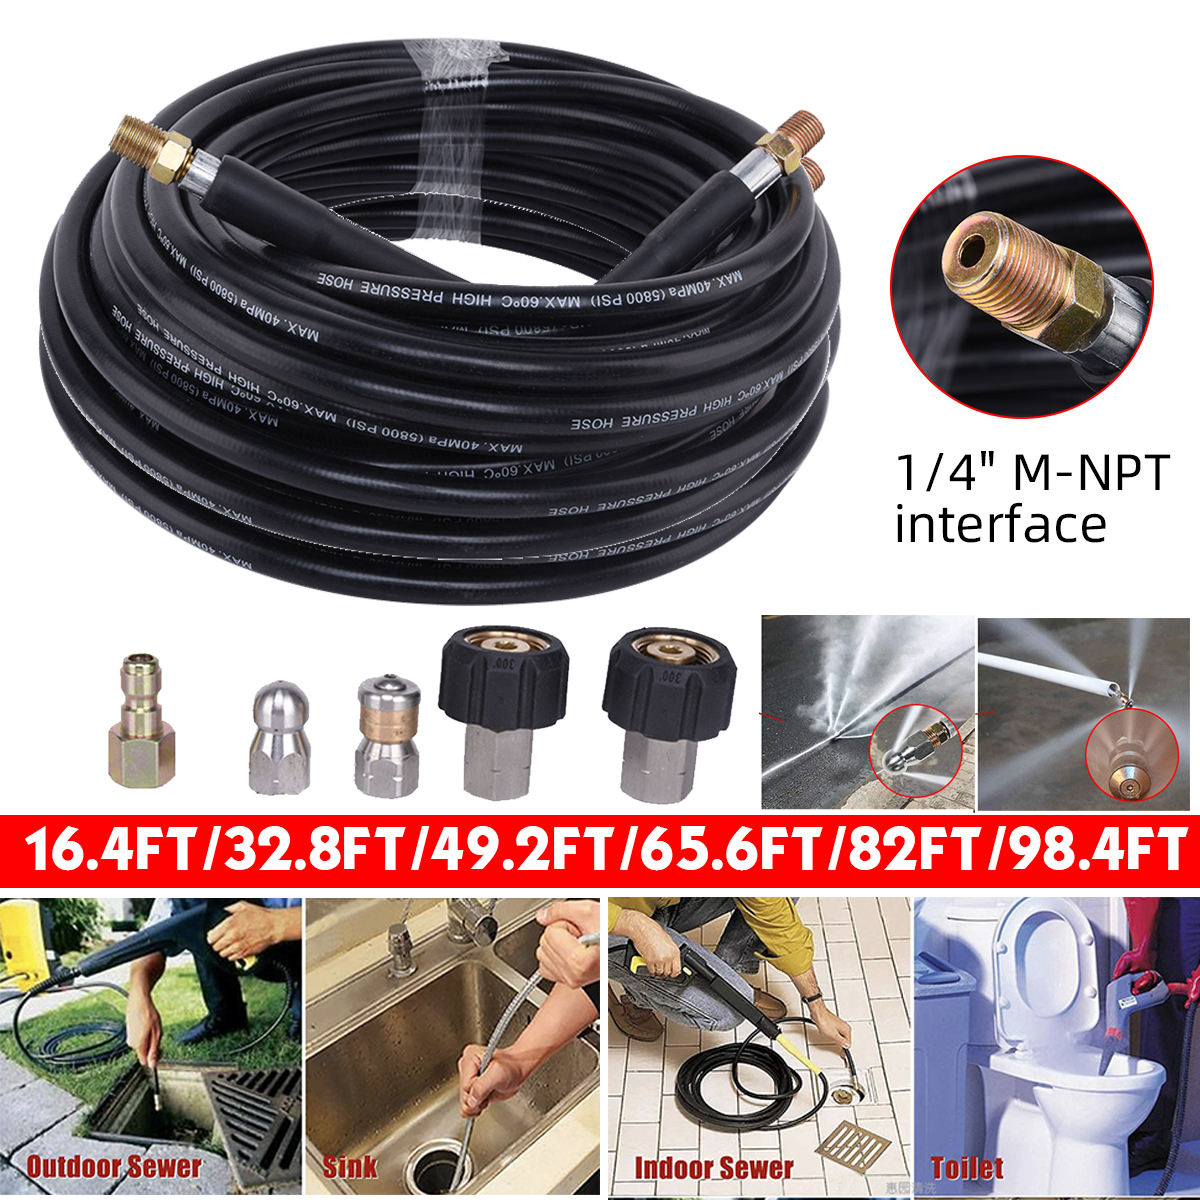 5-30m-14quot-M-NPT-Hose-Sewer-Line-And-Drain-Jetter-Kit-W-Sewer-Nozzle--Adapter-1717545-1